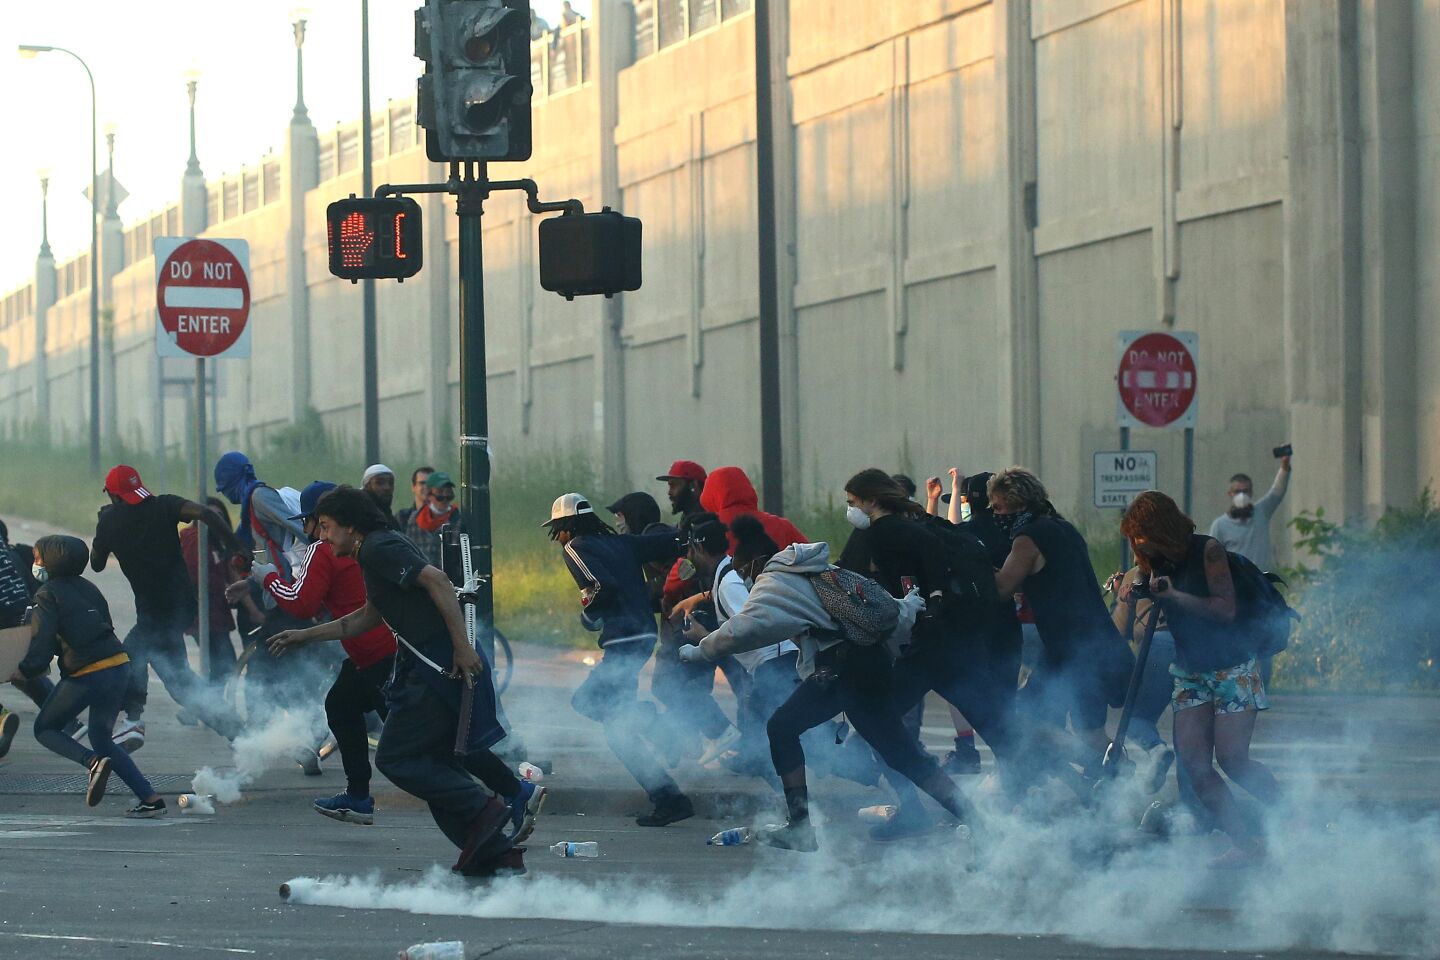 People run as tear gas canisters land near them.